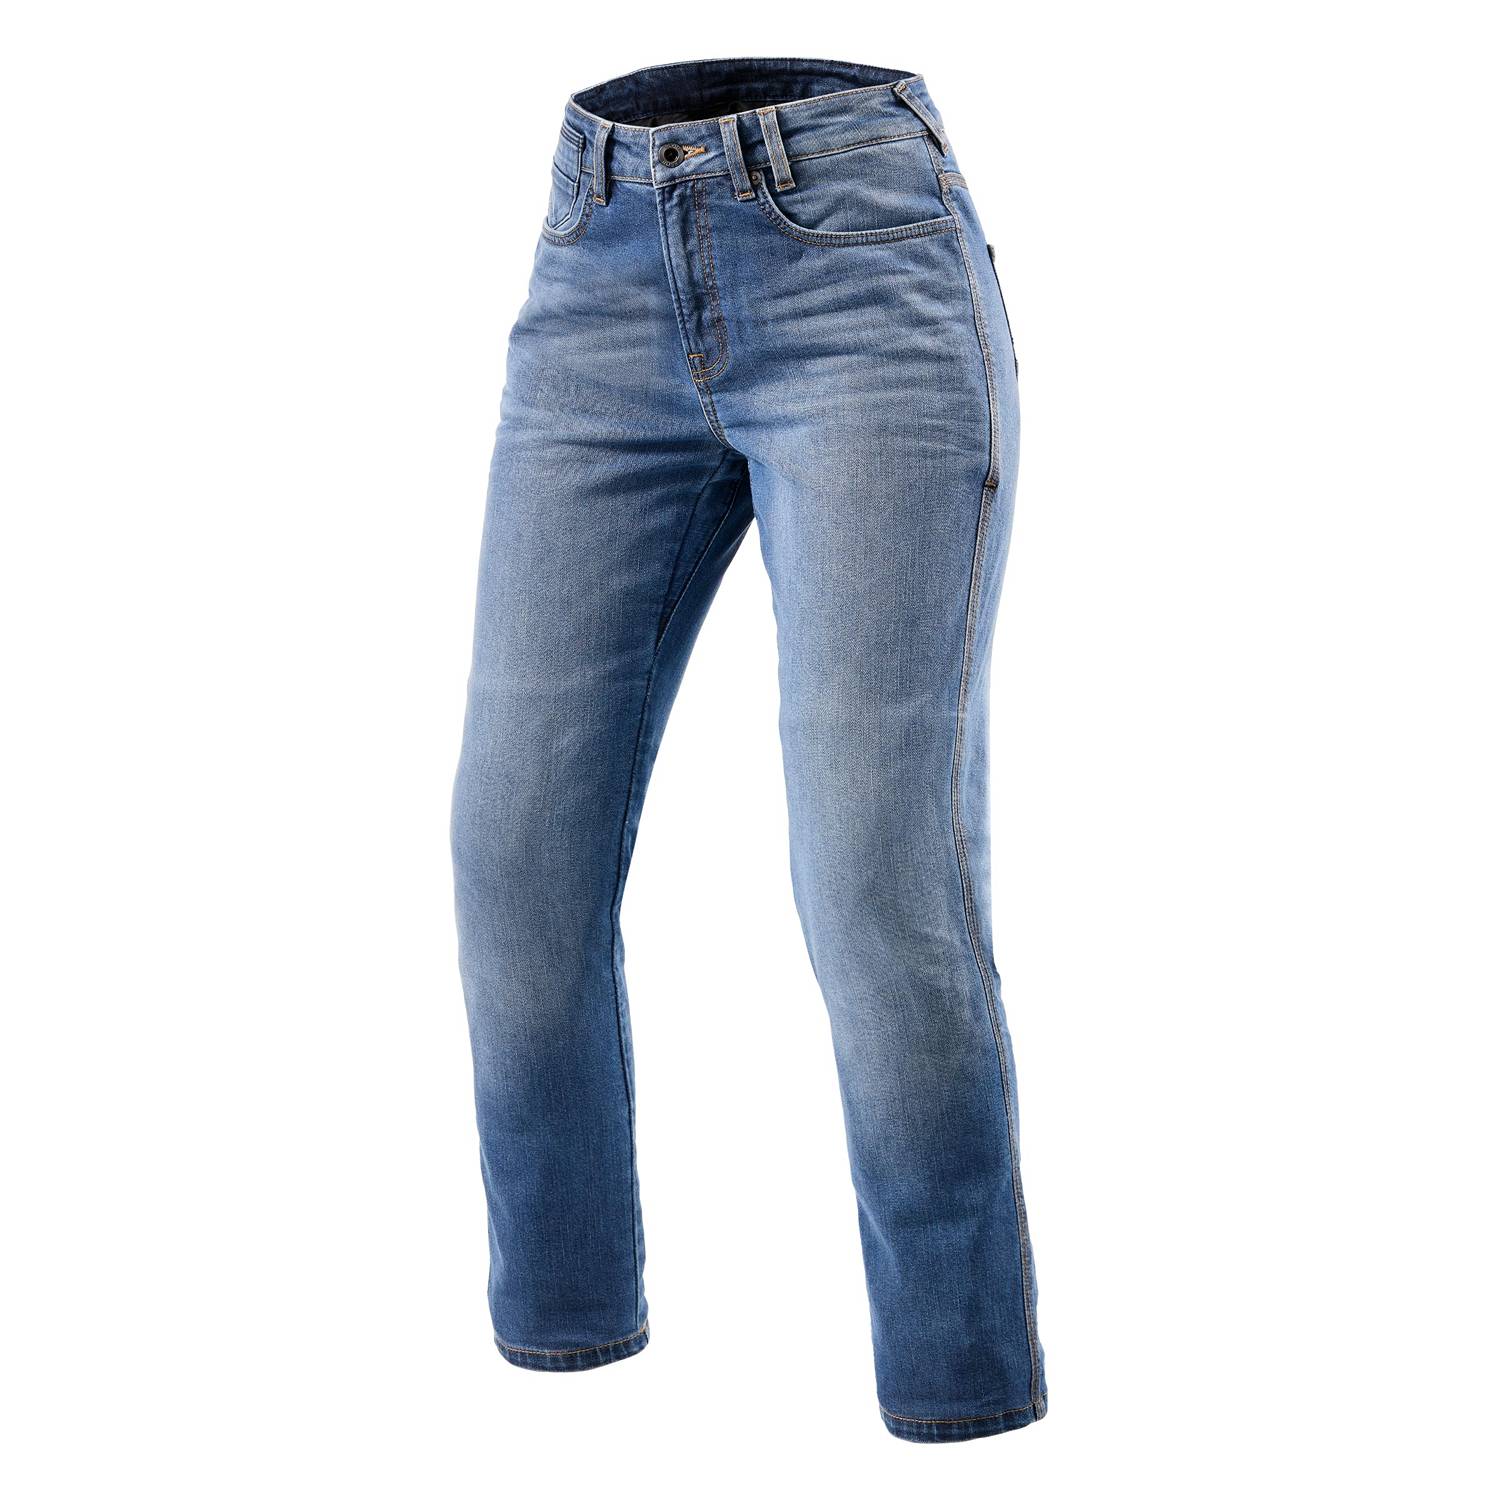 Image of EU REV'IT! Jeans Victoria 2 Ladies SF Classic Blue Used Motorcycle Jeans Taille L32/W26